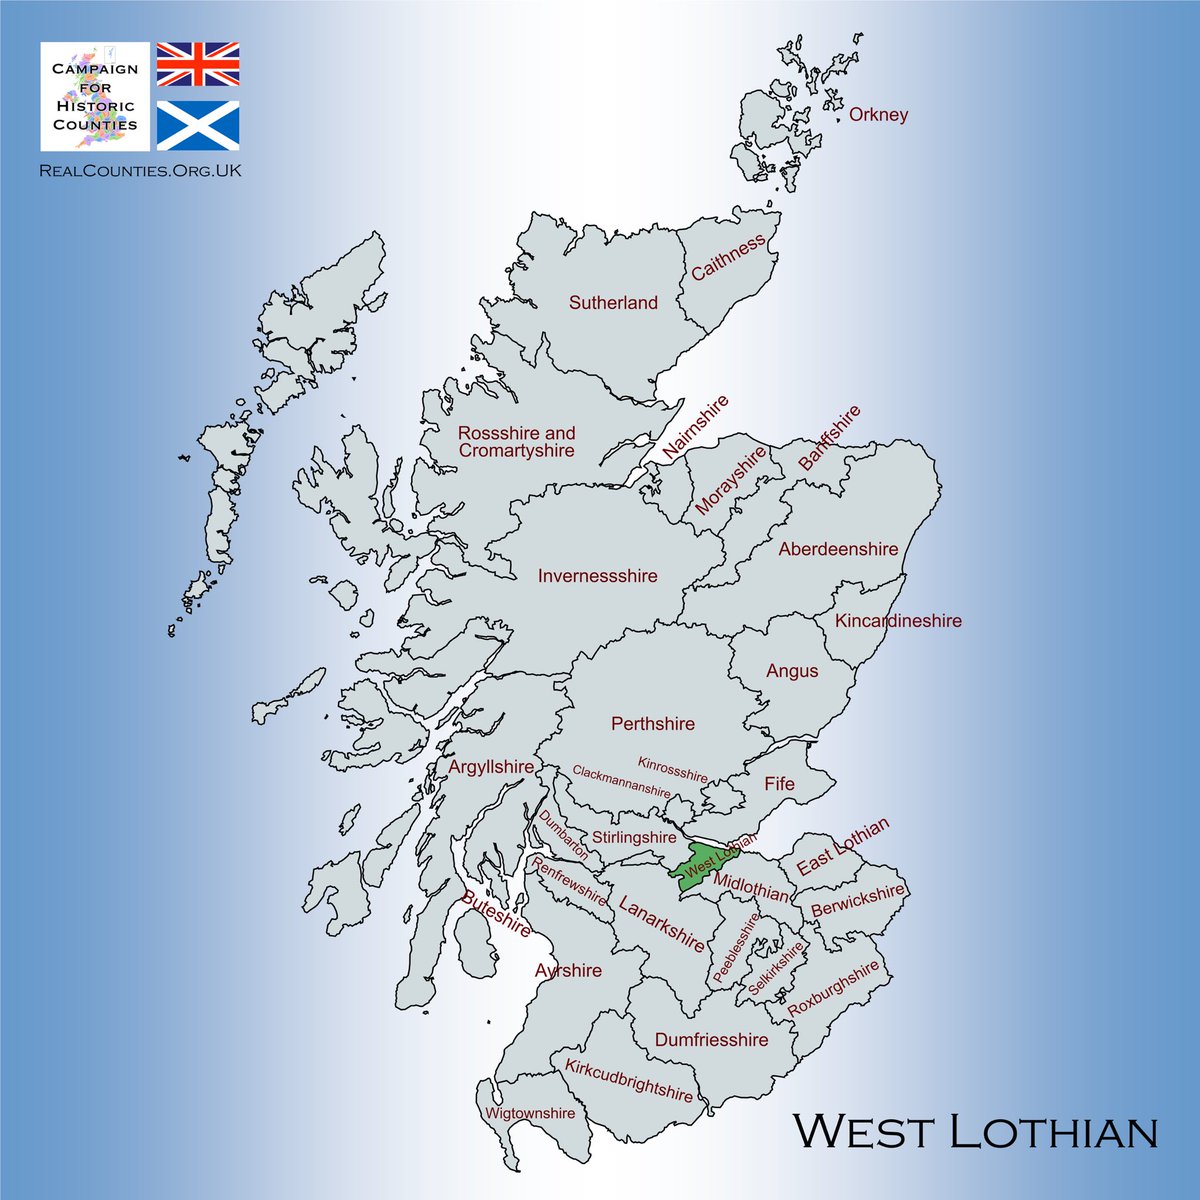 The County of #WestLothian or Linlithgow is a shire on the south bank and at the head of the Firth of Forth.

Its county town is the royal burgh of Linlithgow, from which it takes its alternative name, #Linlithgowshire.

🇬🇧 #HistoricCounties | #RealCounties 🏴󠁧󠁢󠁳󠁣󠁴󠁿